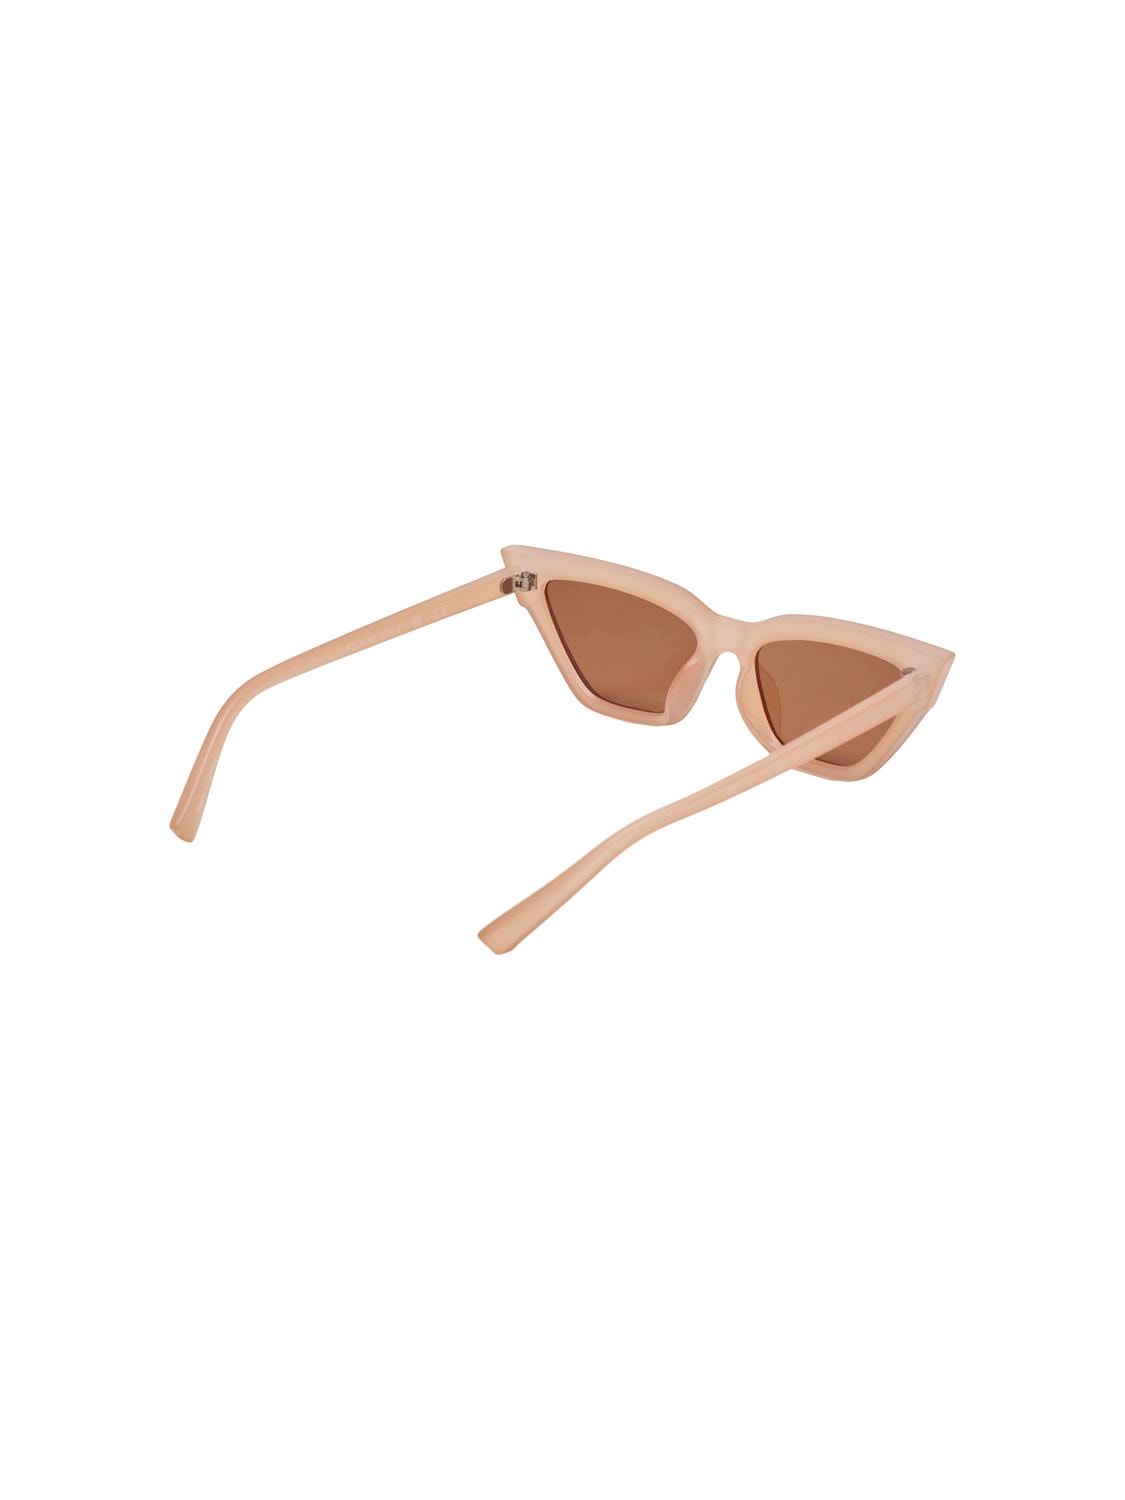 ONLY Classic sunglasses -Umber - 15310005